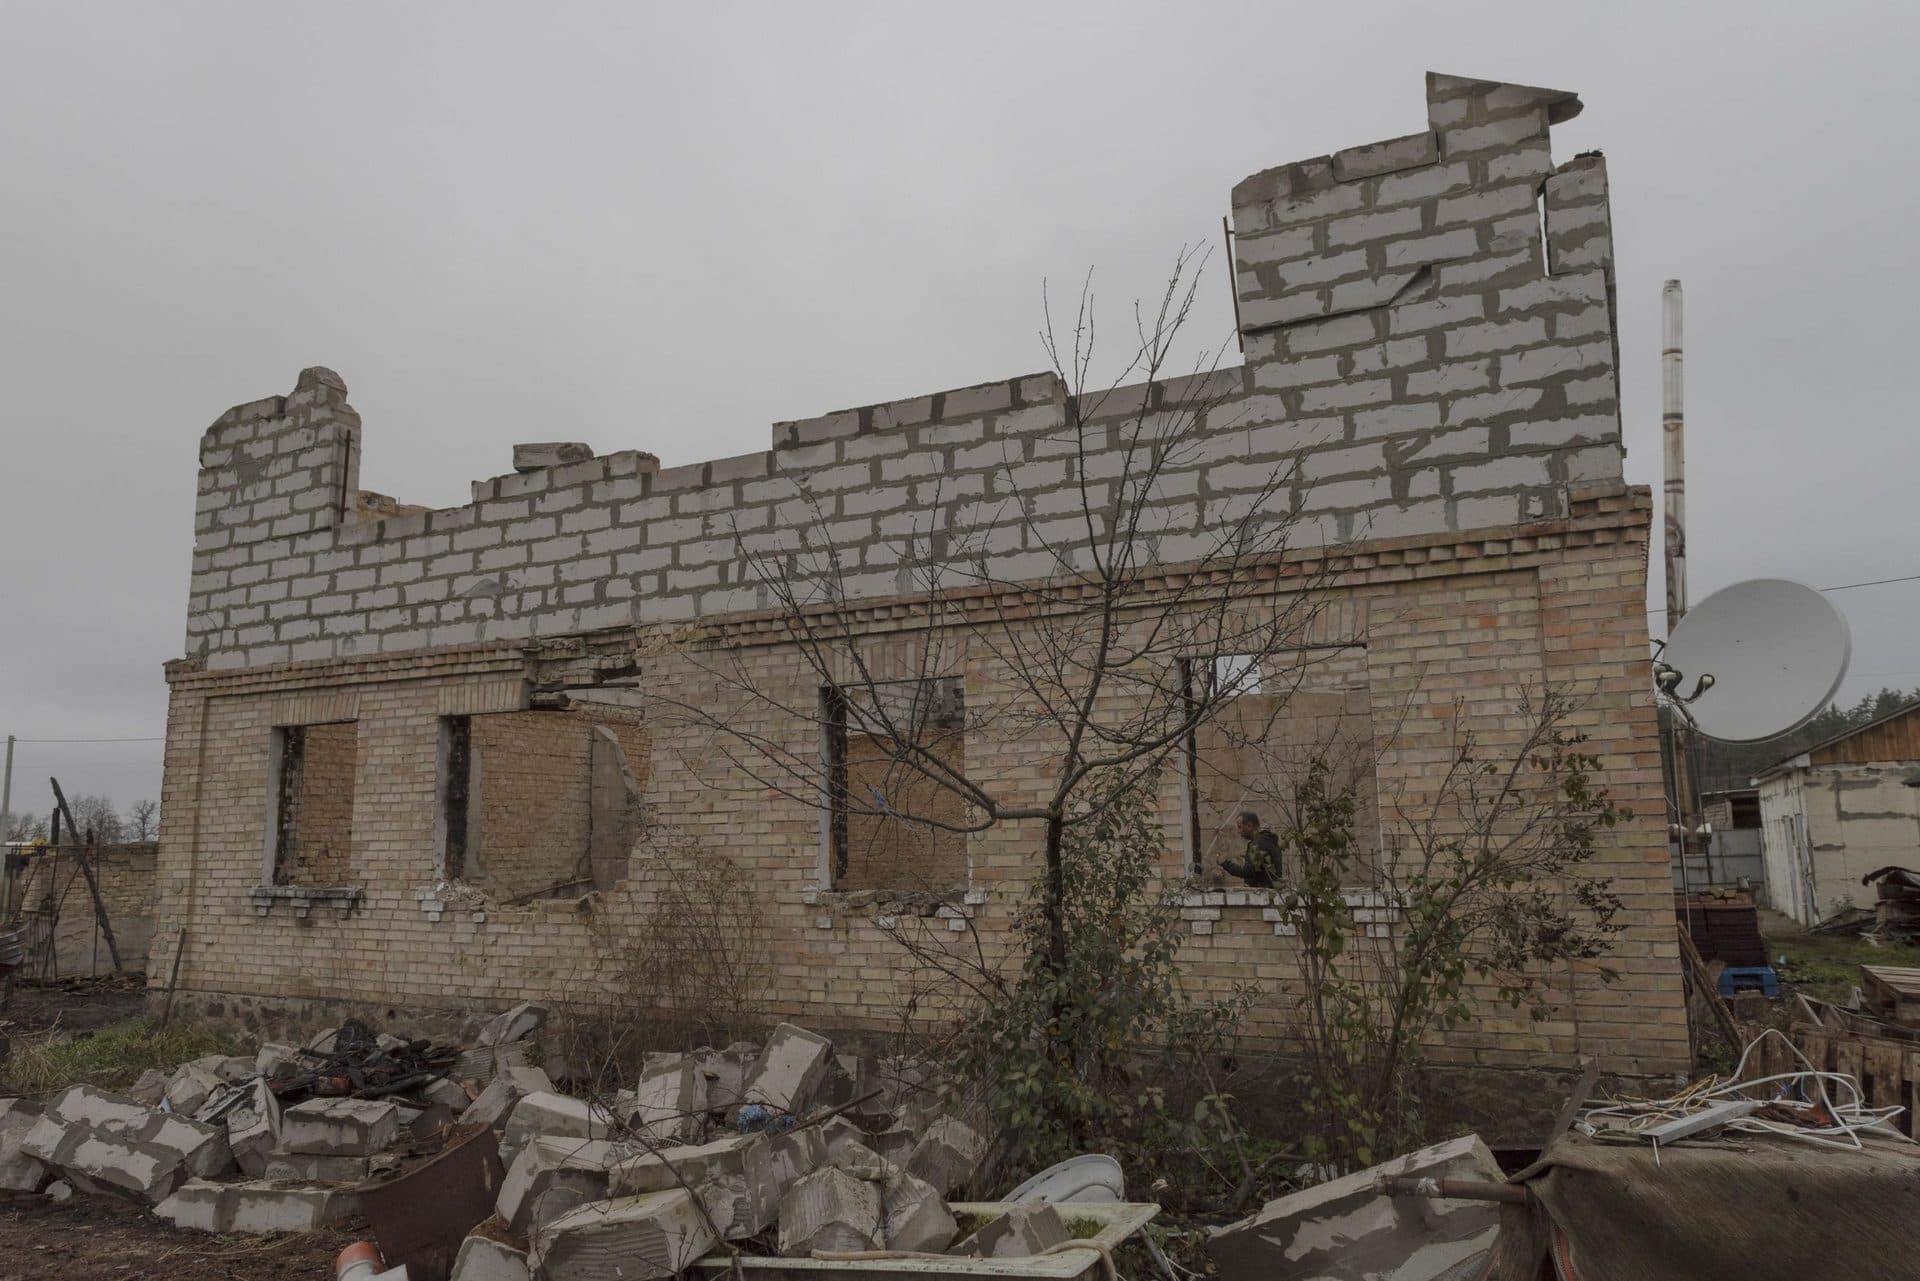 Vadym Zherdetsky stands in the remains of his house destroyed by fighting, in the village of Moshchun